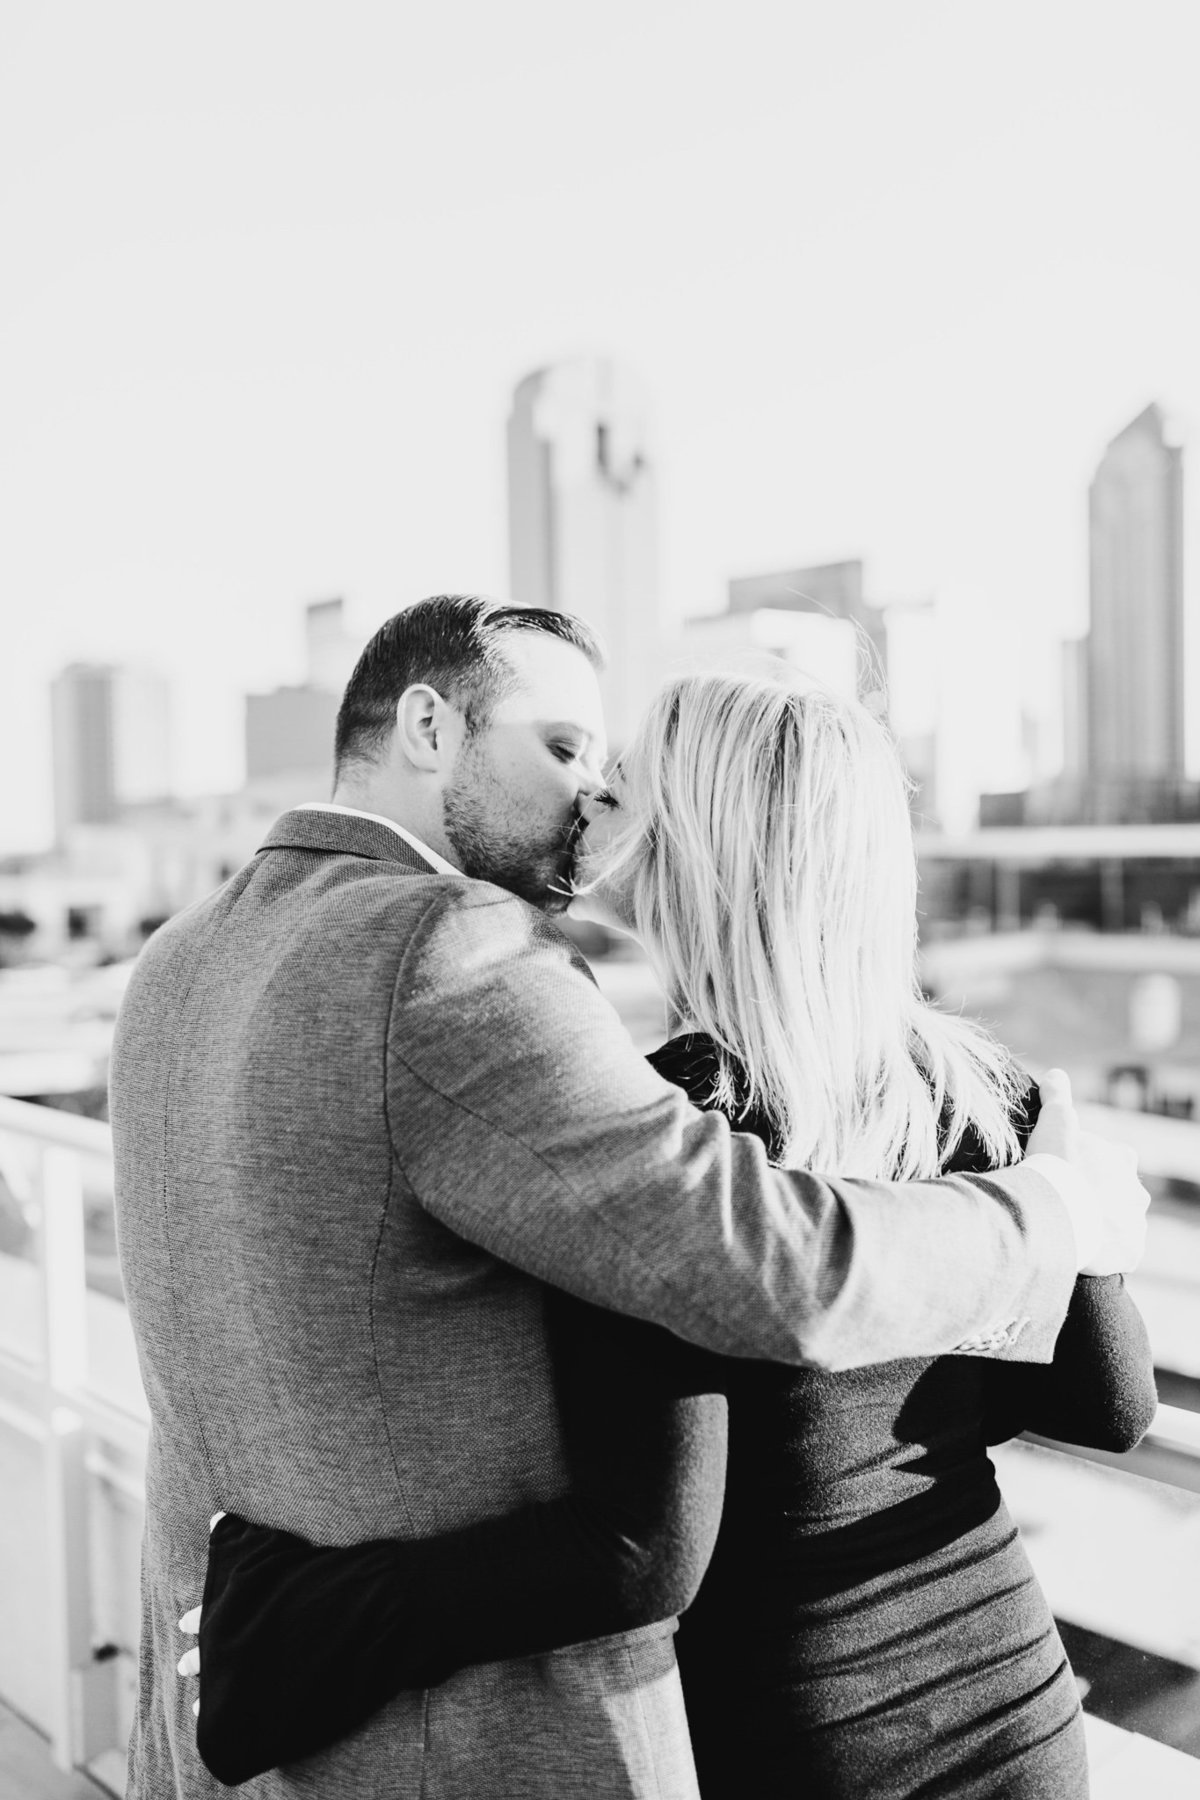 Eric & Megan - Downtown Dallas Rooftop Proposal & Engagement Session-80